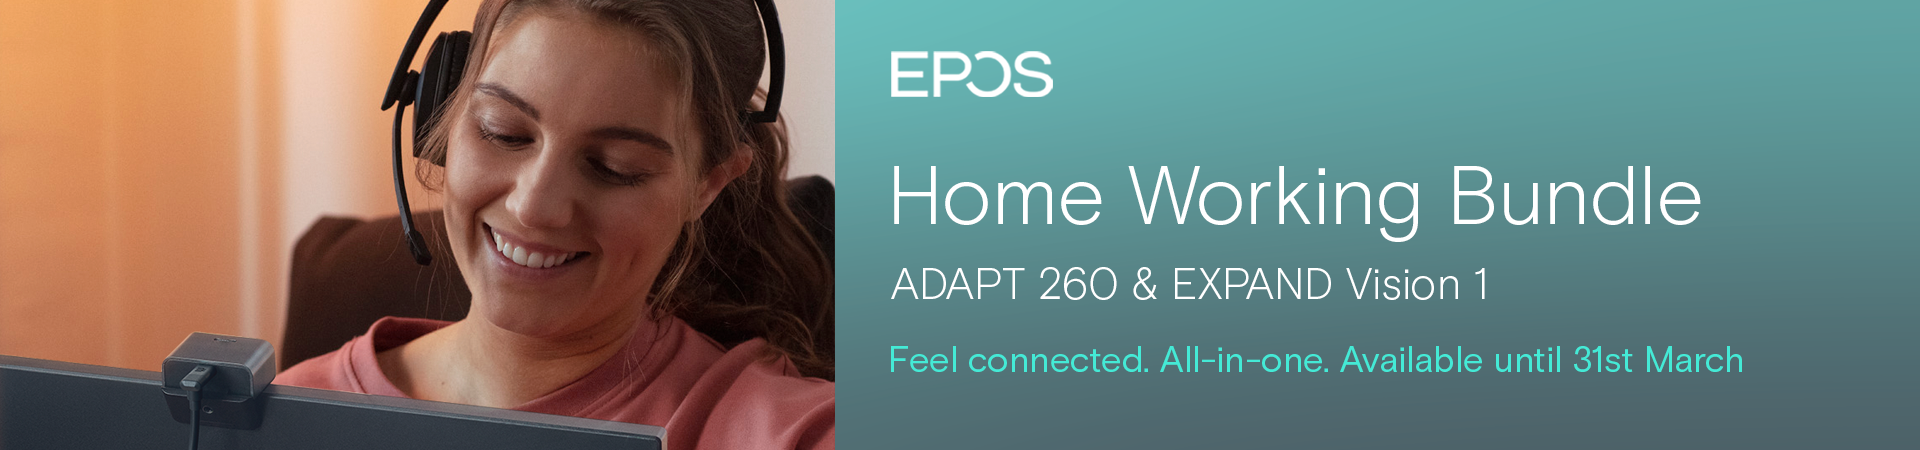 EPOS Home Working Bundle Promotion - EXPAND Vision 1 & ADAPT 260. Feel connected. All-in-one.